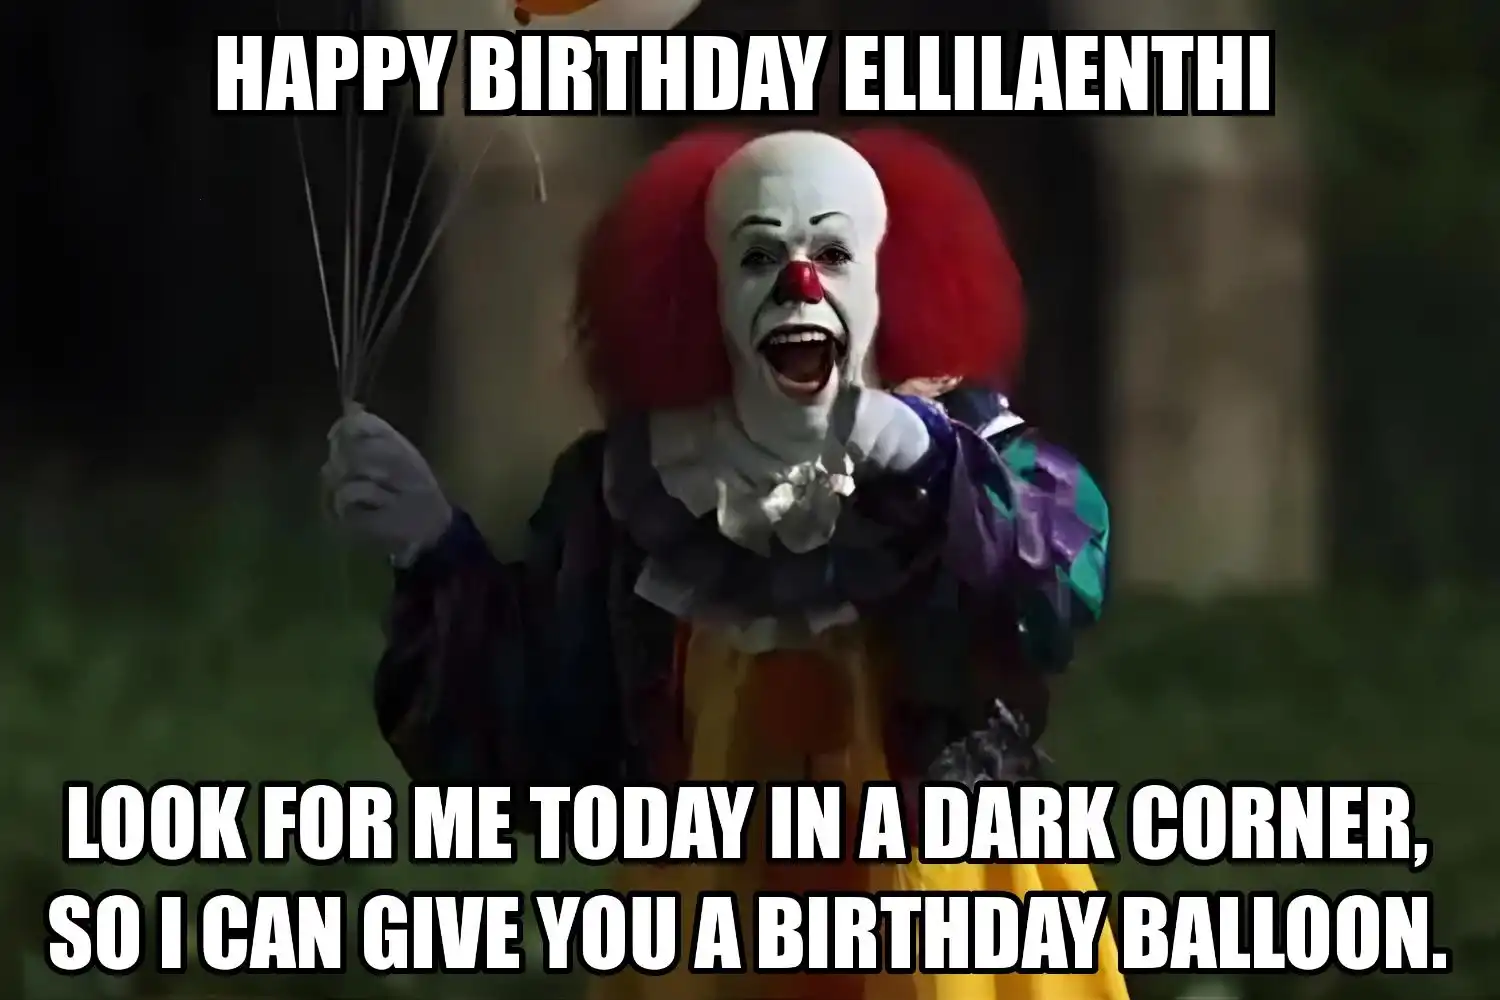 Happy Birthday Ellilaenthi I Can Give You A Balloon Meme